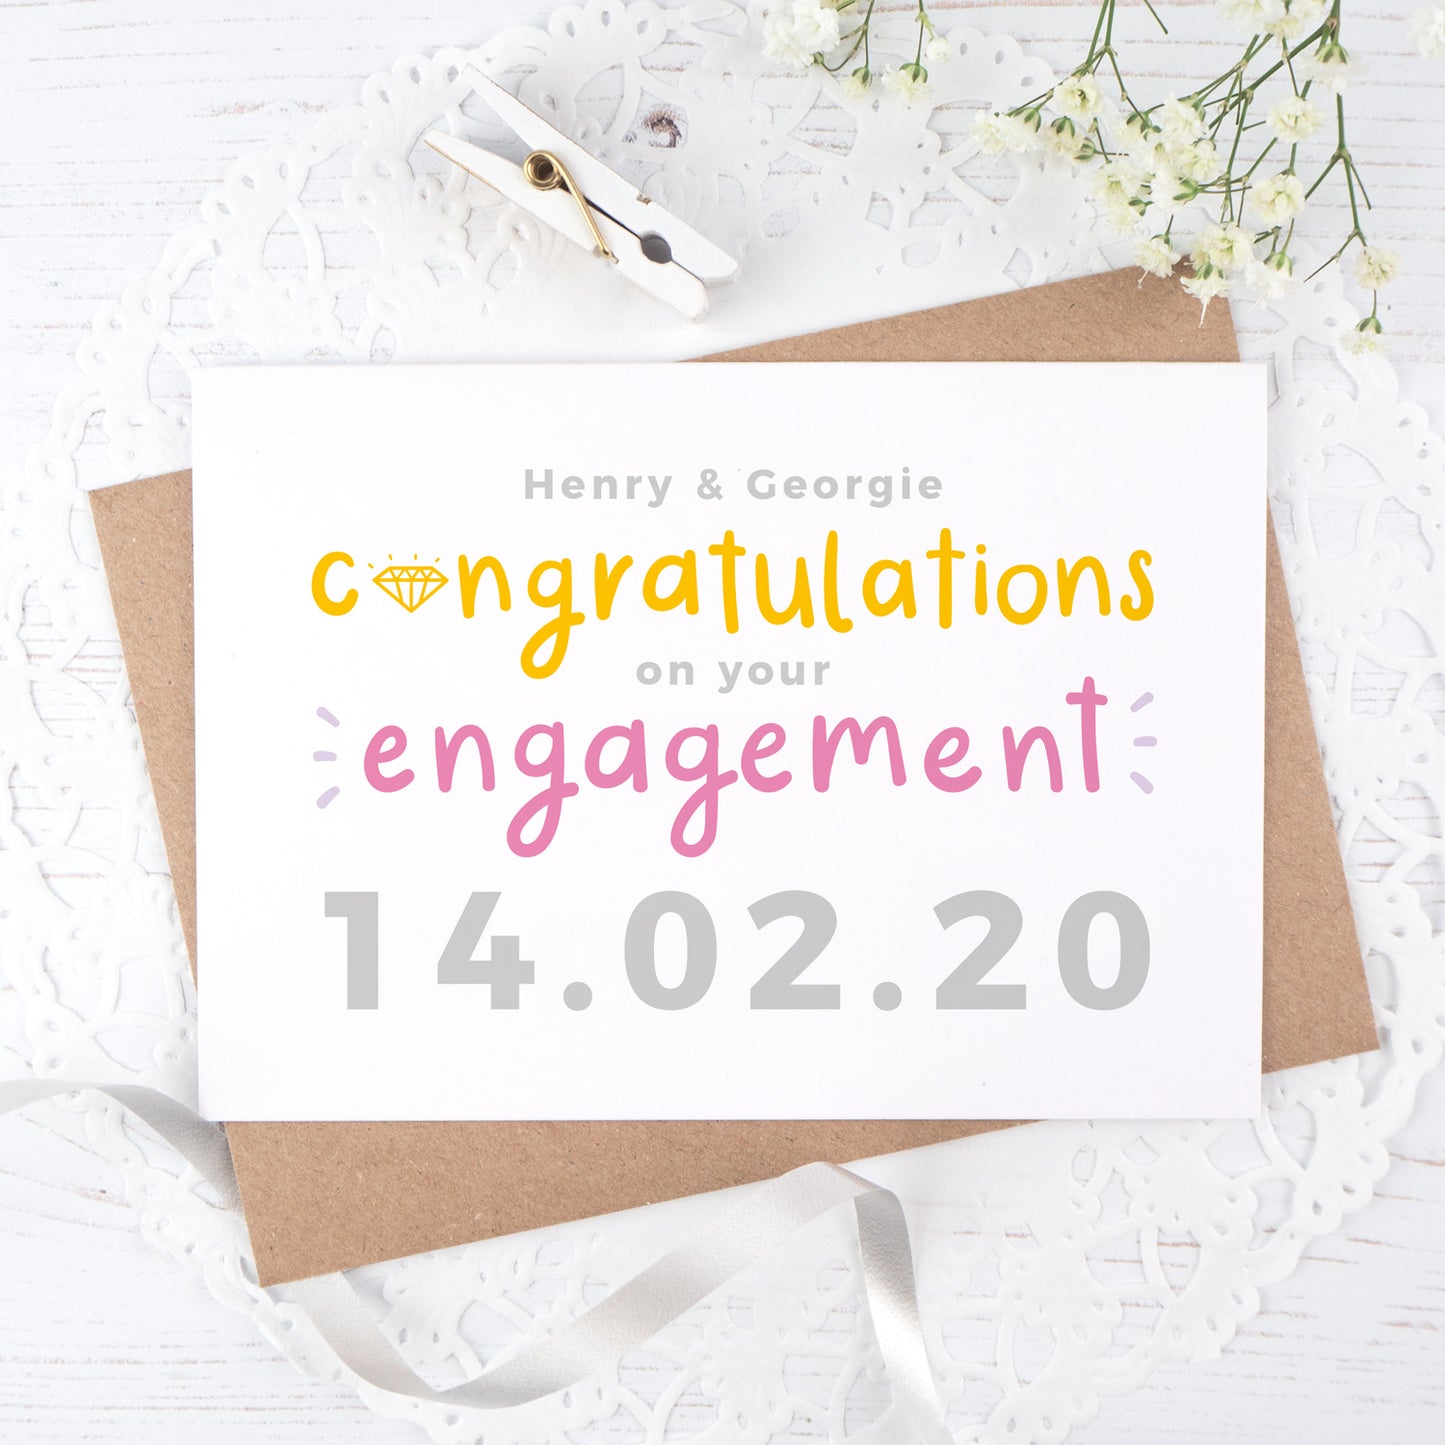 A personalised engagement card with room for the happy couples names and date the question was popped! This card has orange and pink text on a white background with a grey date.